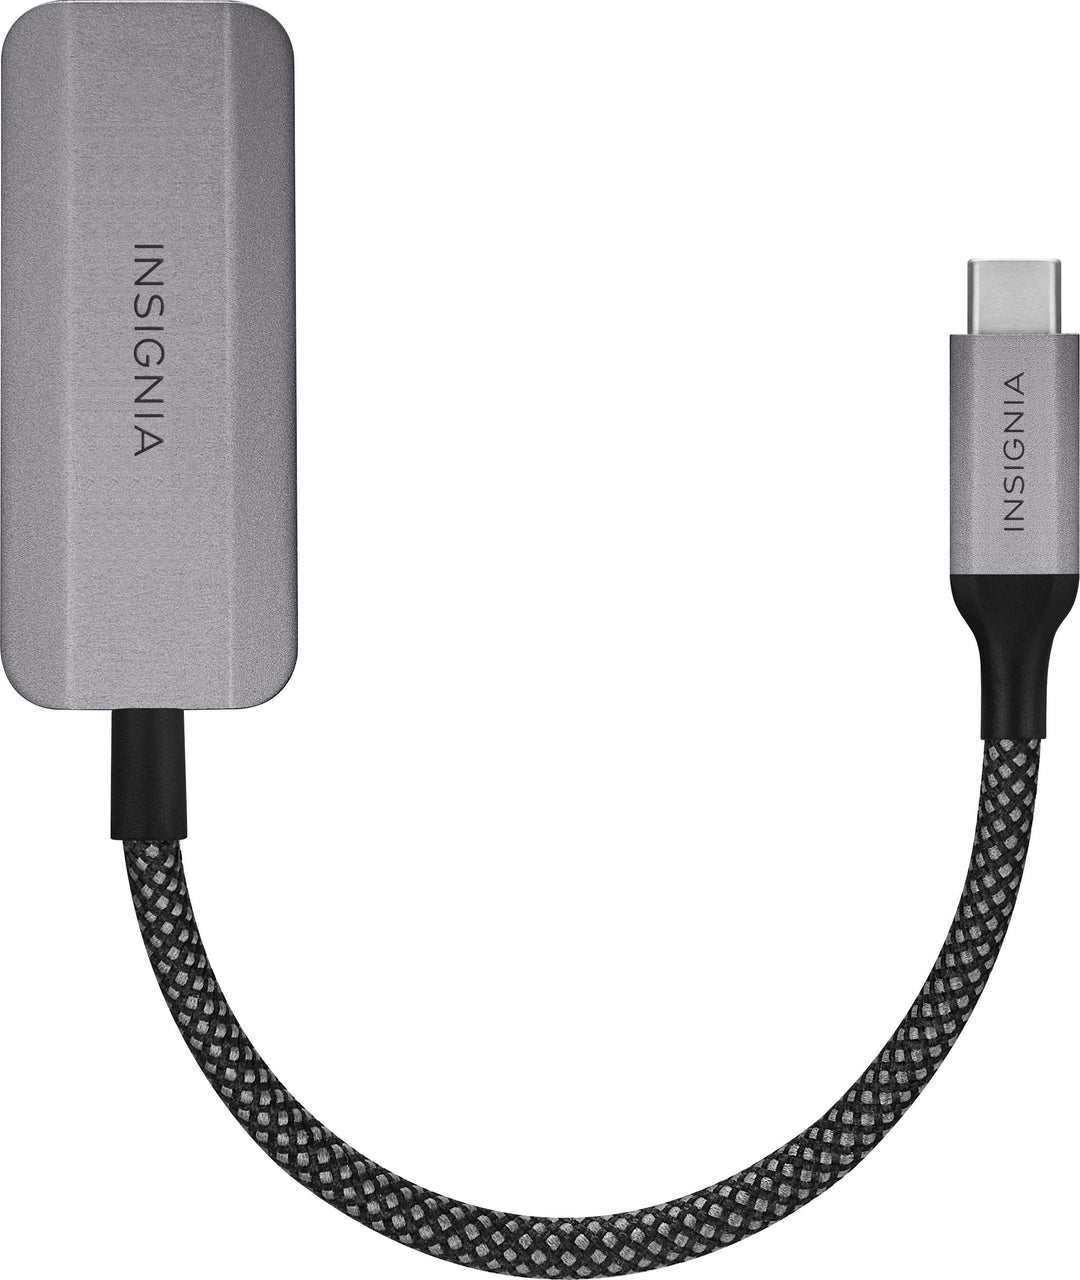 Insignia™ - USB-C to Ethernet Adapter - Black_2